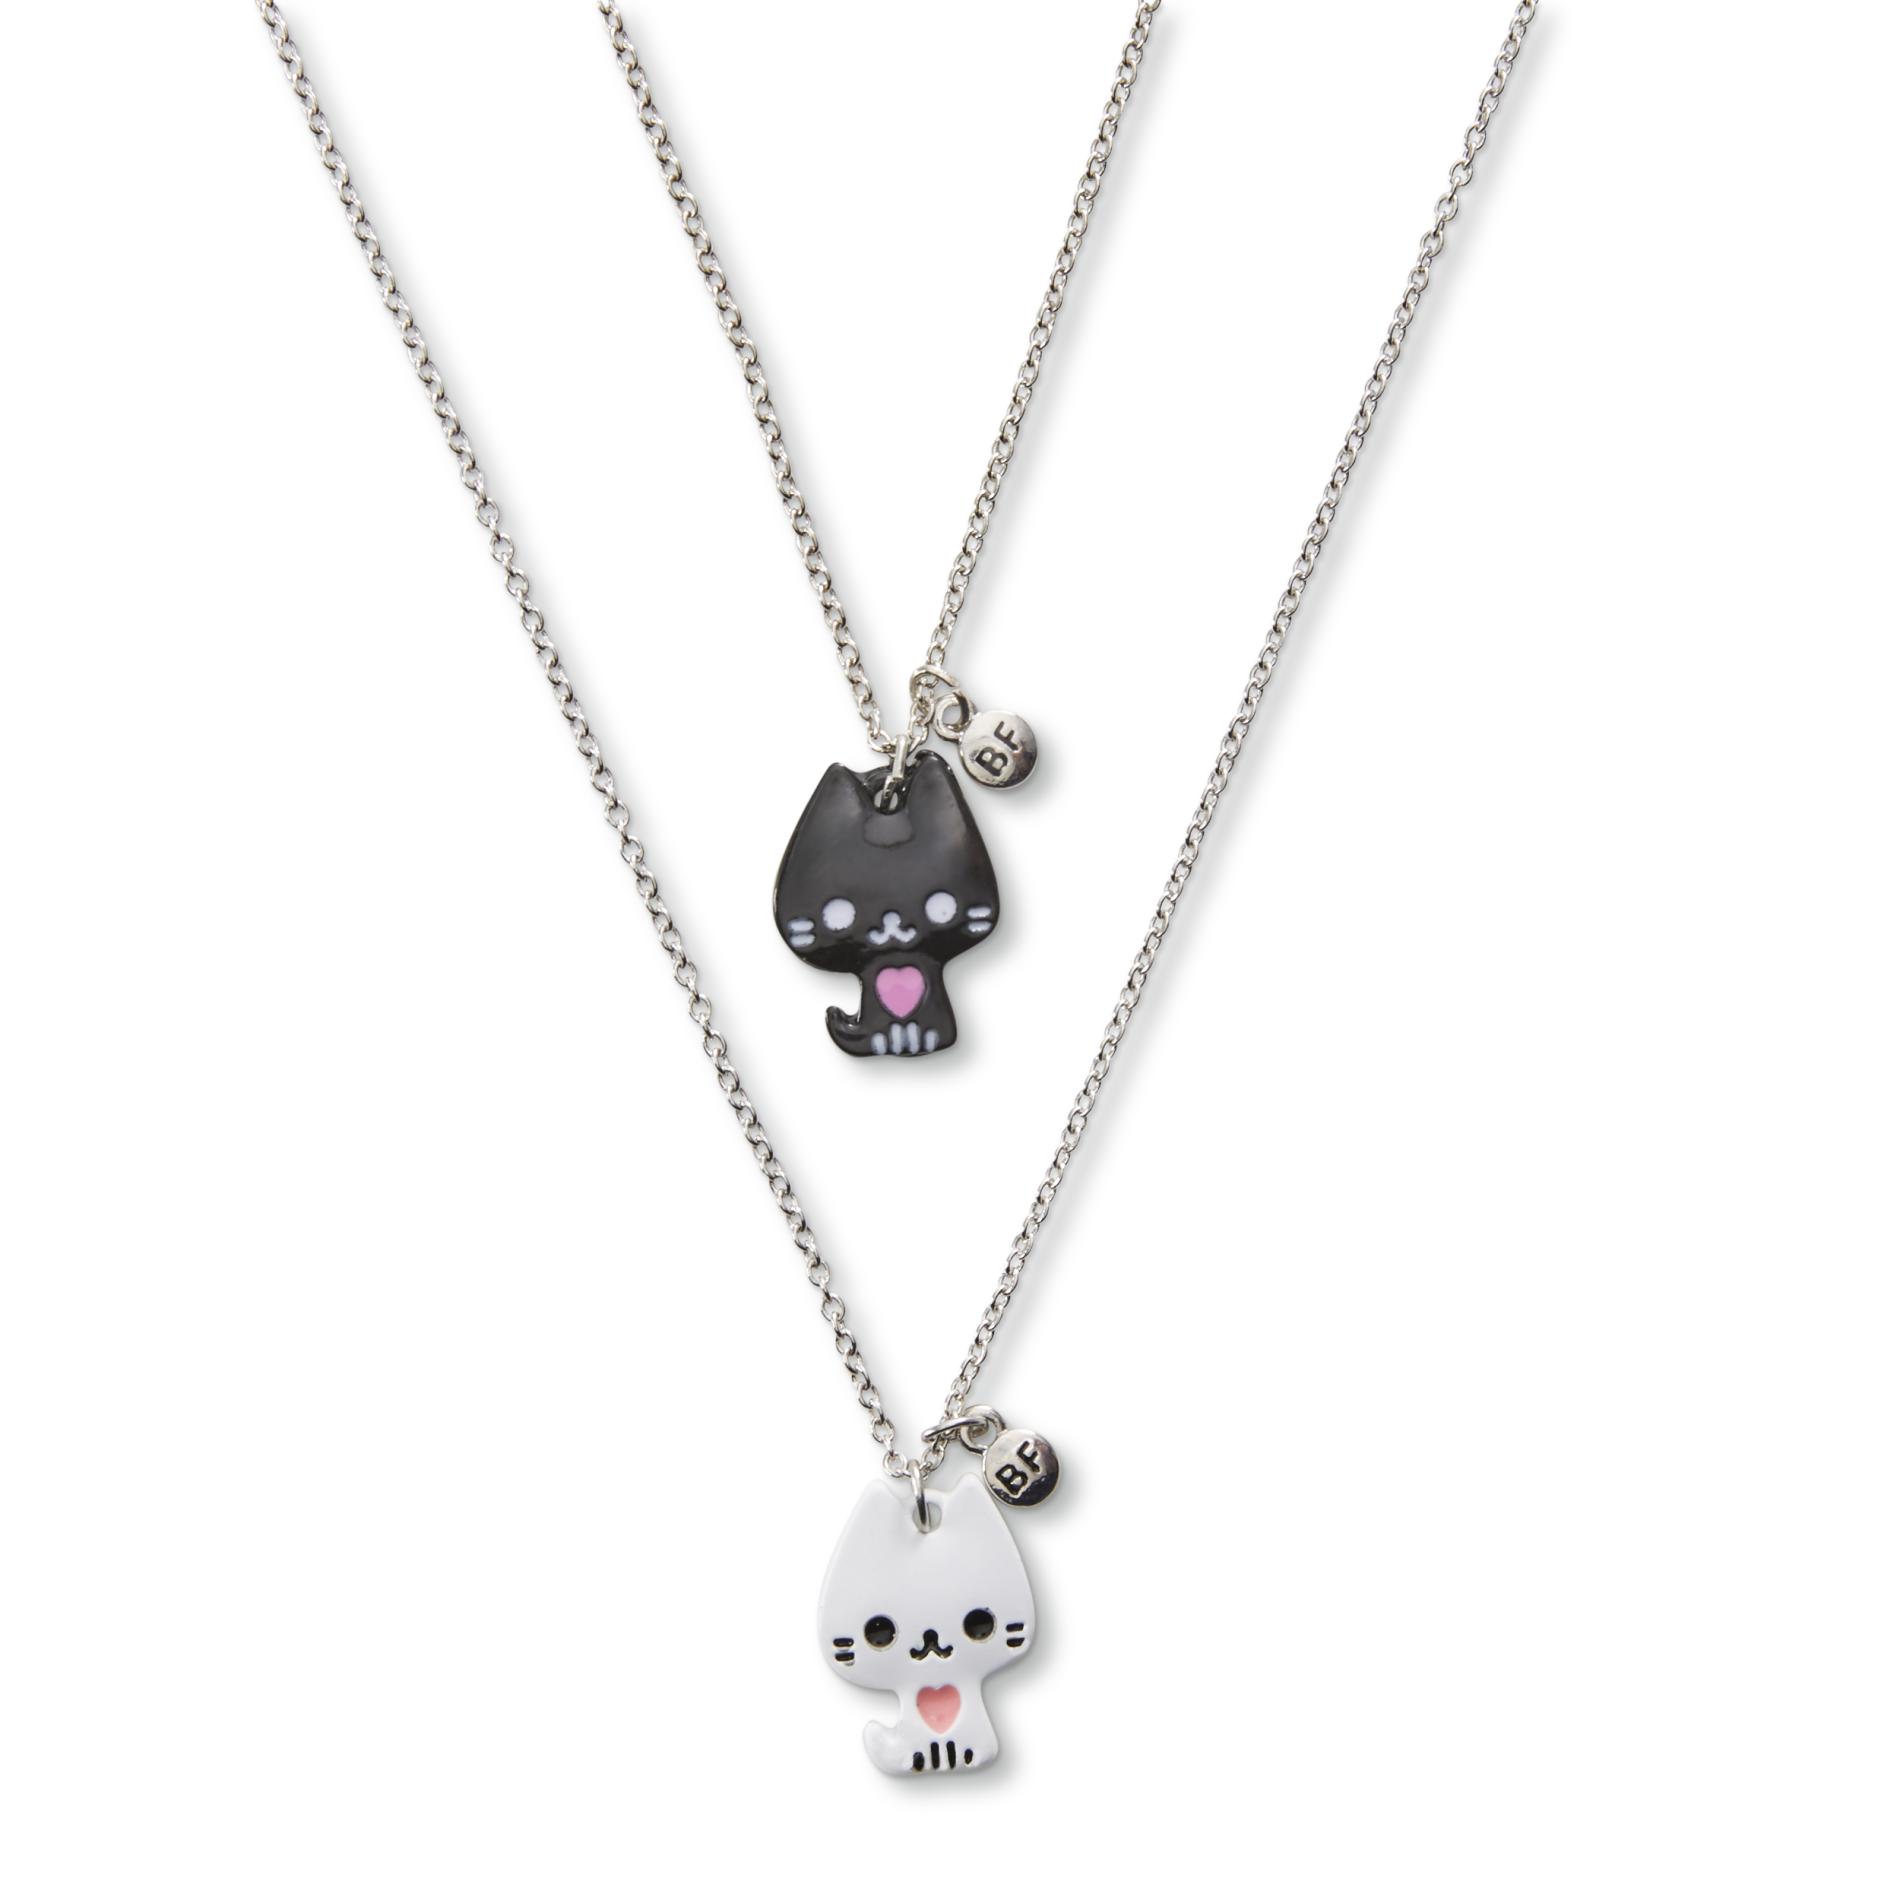 Attention Girls' 2-Pack Silvertone Best Friends Necklaces - Cat